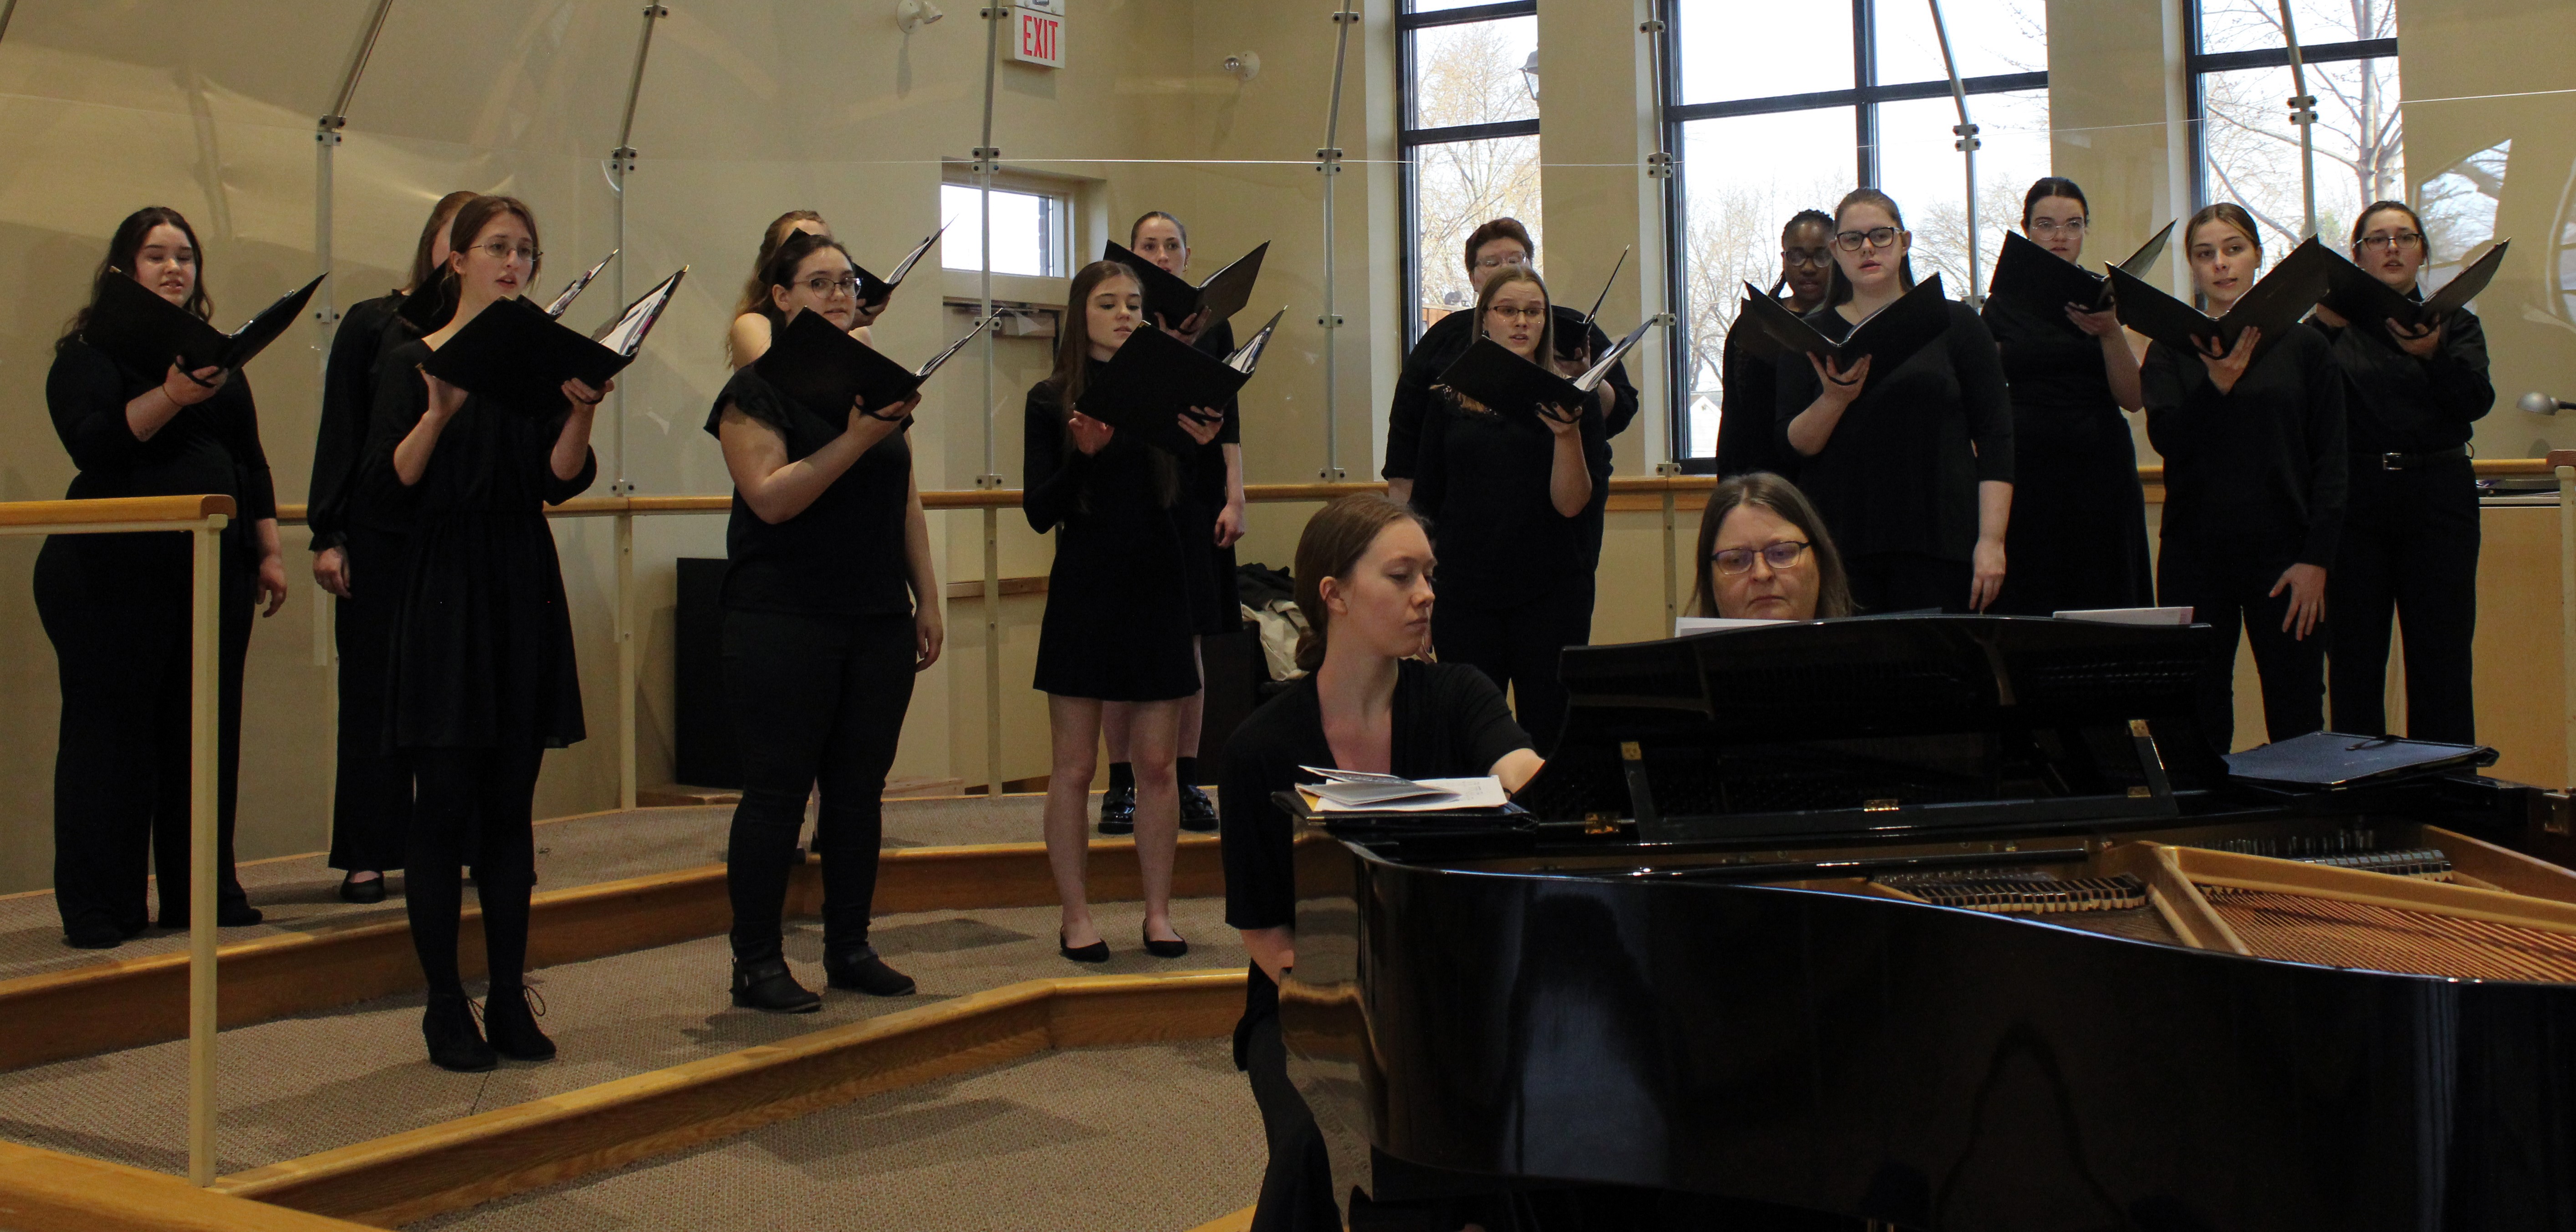 This is a picture of the Alta Voce choir in performance.